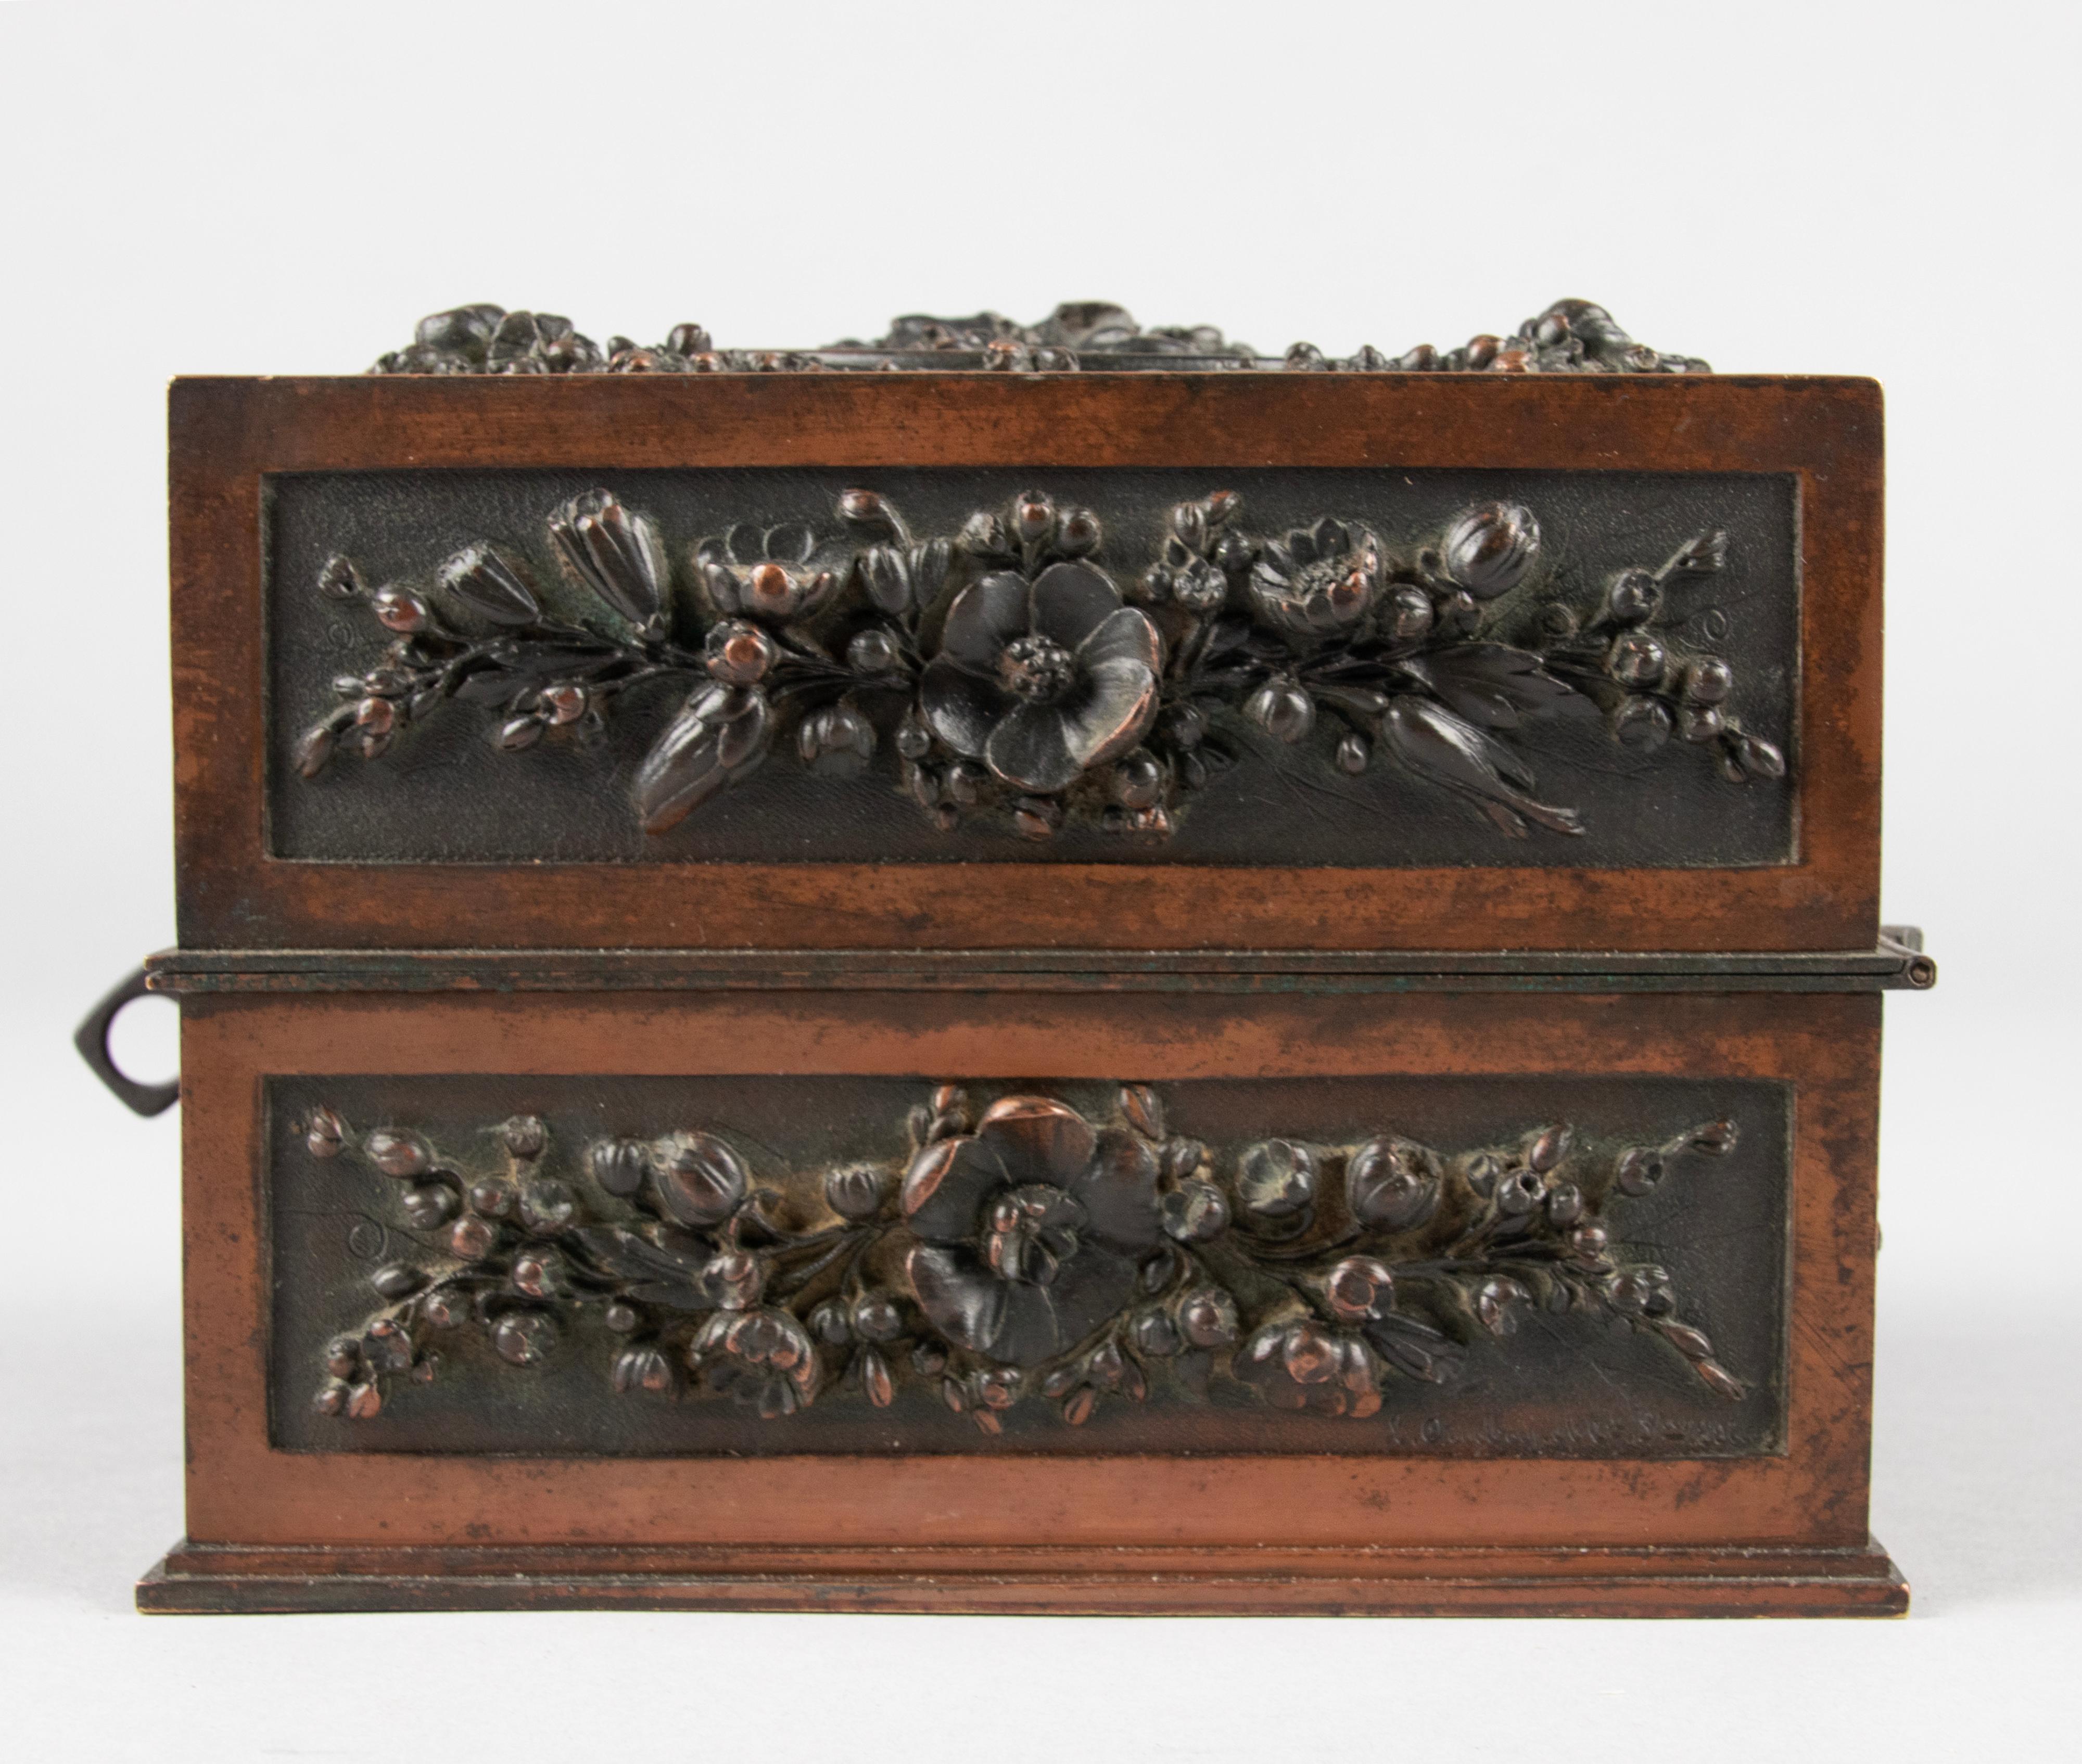 Late 19th Century Black Forest Bronze Decorative Box by Leopold Oudry & Cie. For Sale 3